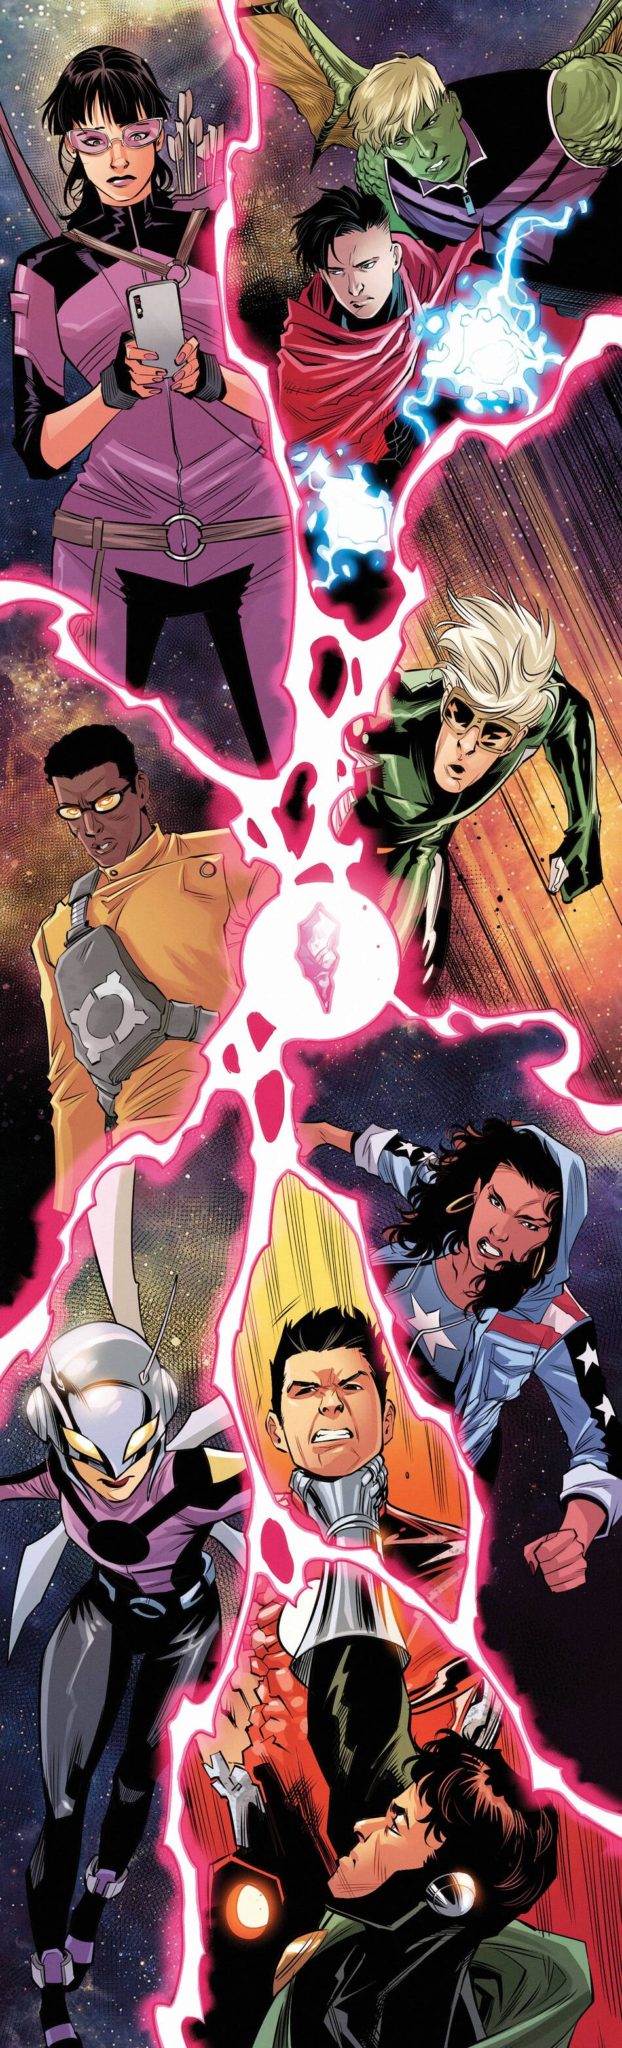 Preview Page from Marvel's Voices: Young Avengers #5